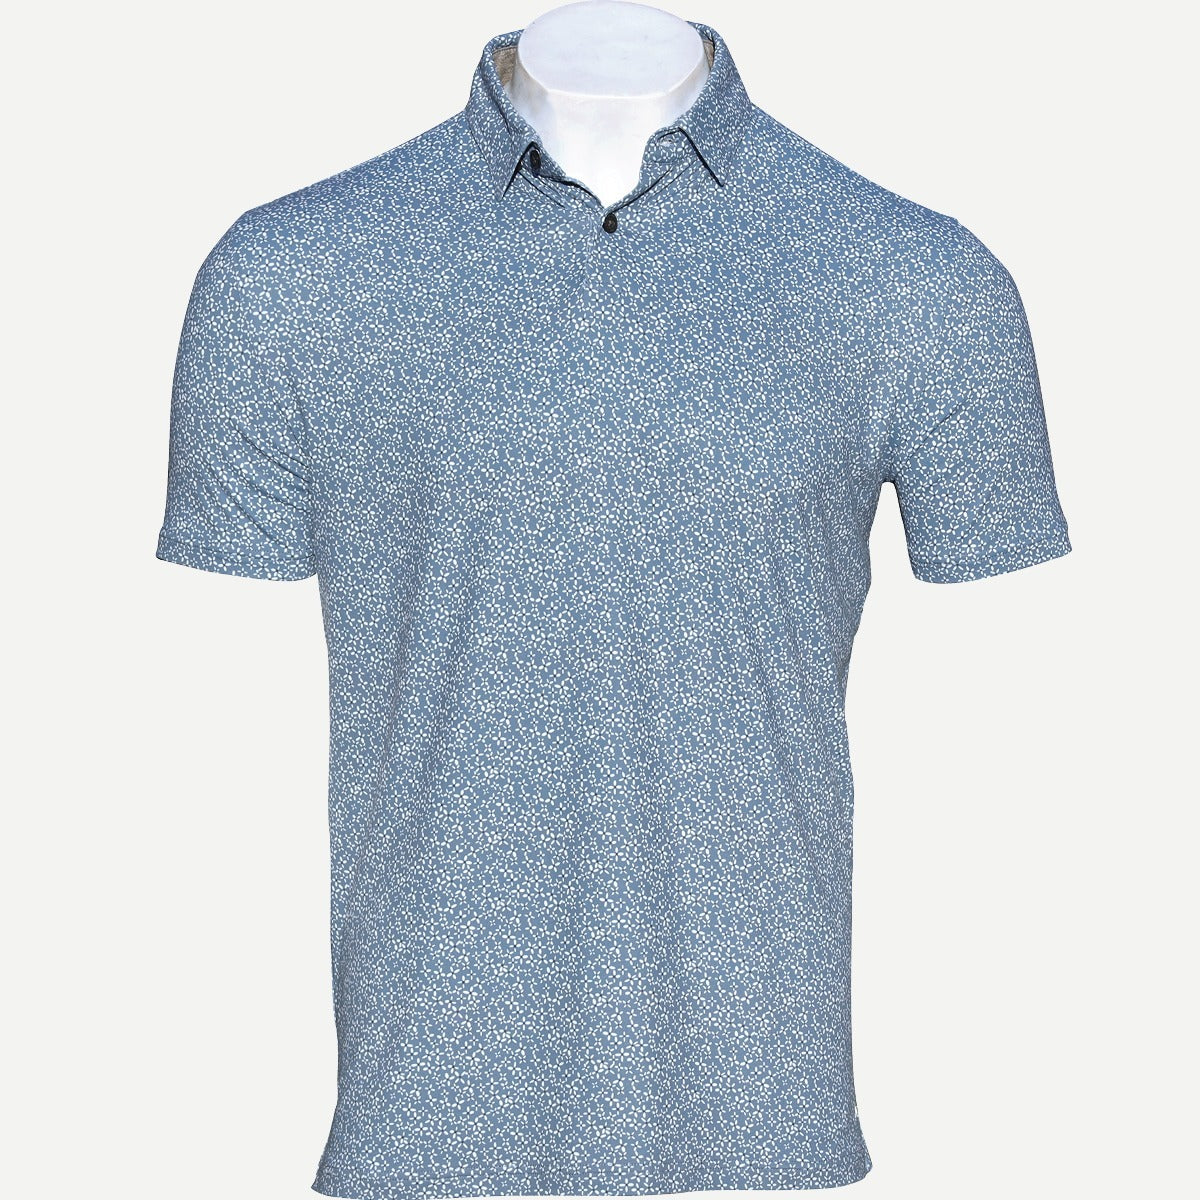 FIRST BLOOMS POLO - ASHLEIGH BLUE